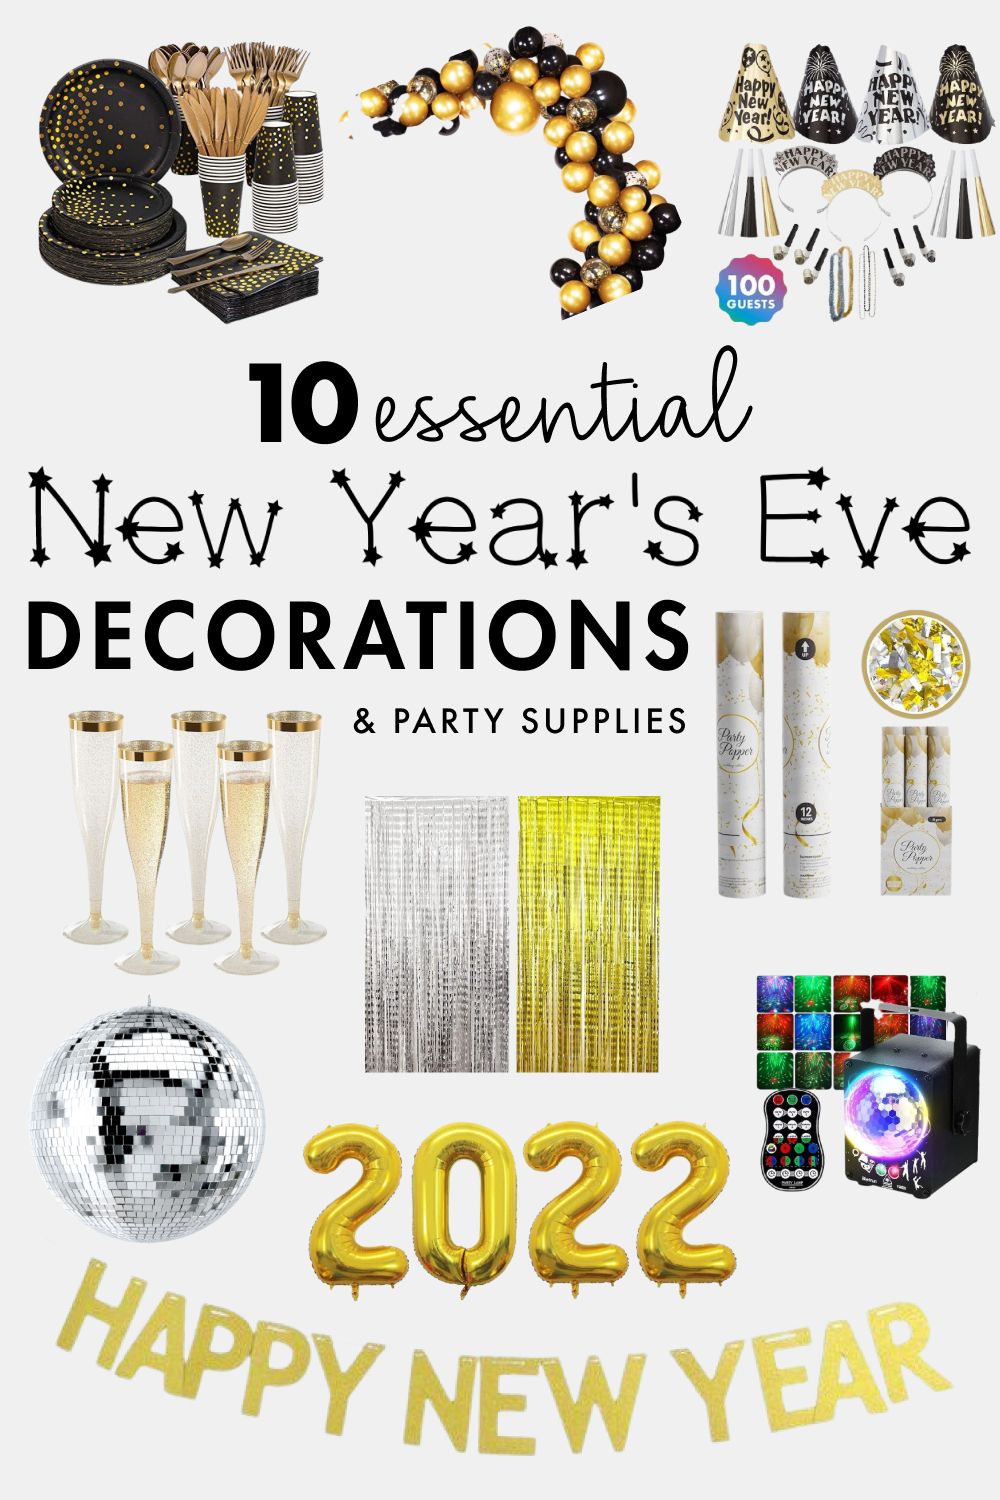 10 Essential New Year's Eve Decorations and Party Supplies